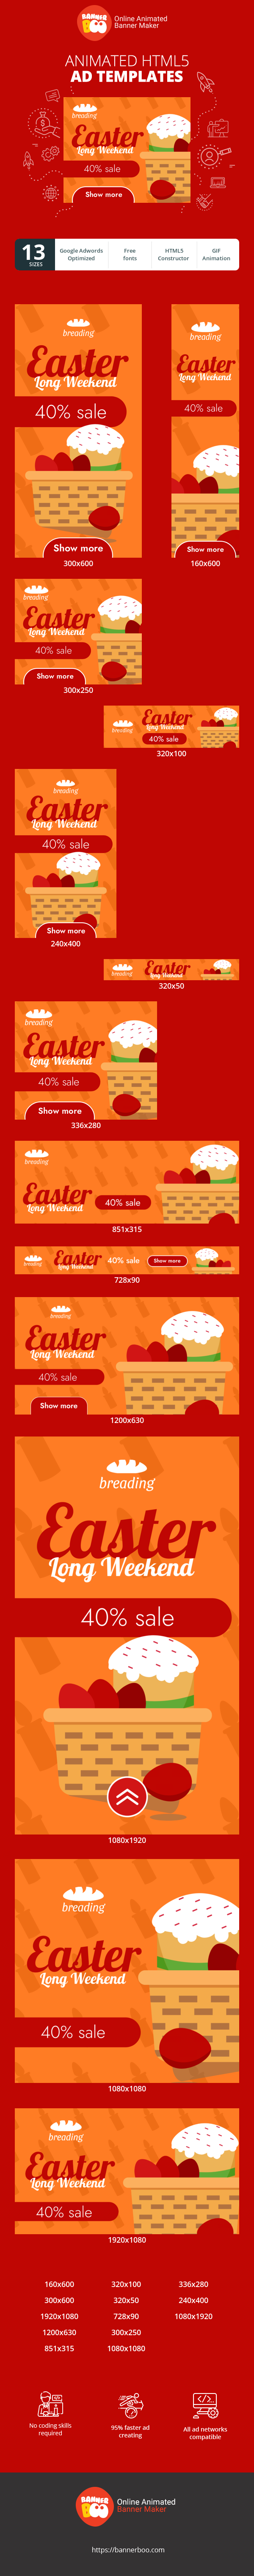 Banner ad template — Easter Long Weekend — 40% Sale